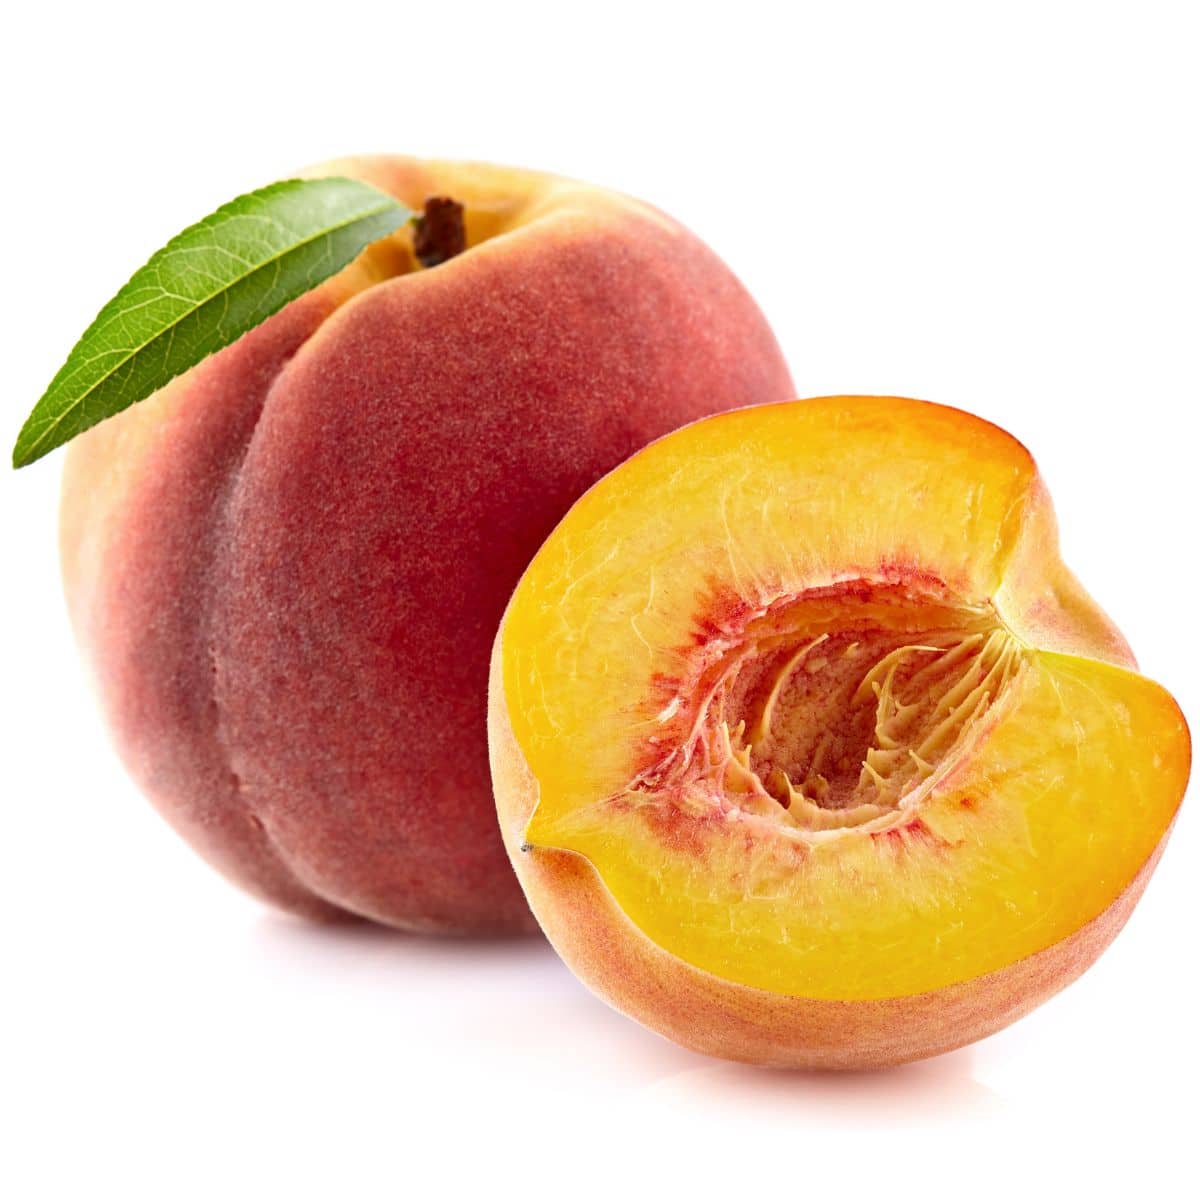 A suncrest peach on a white background.